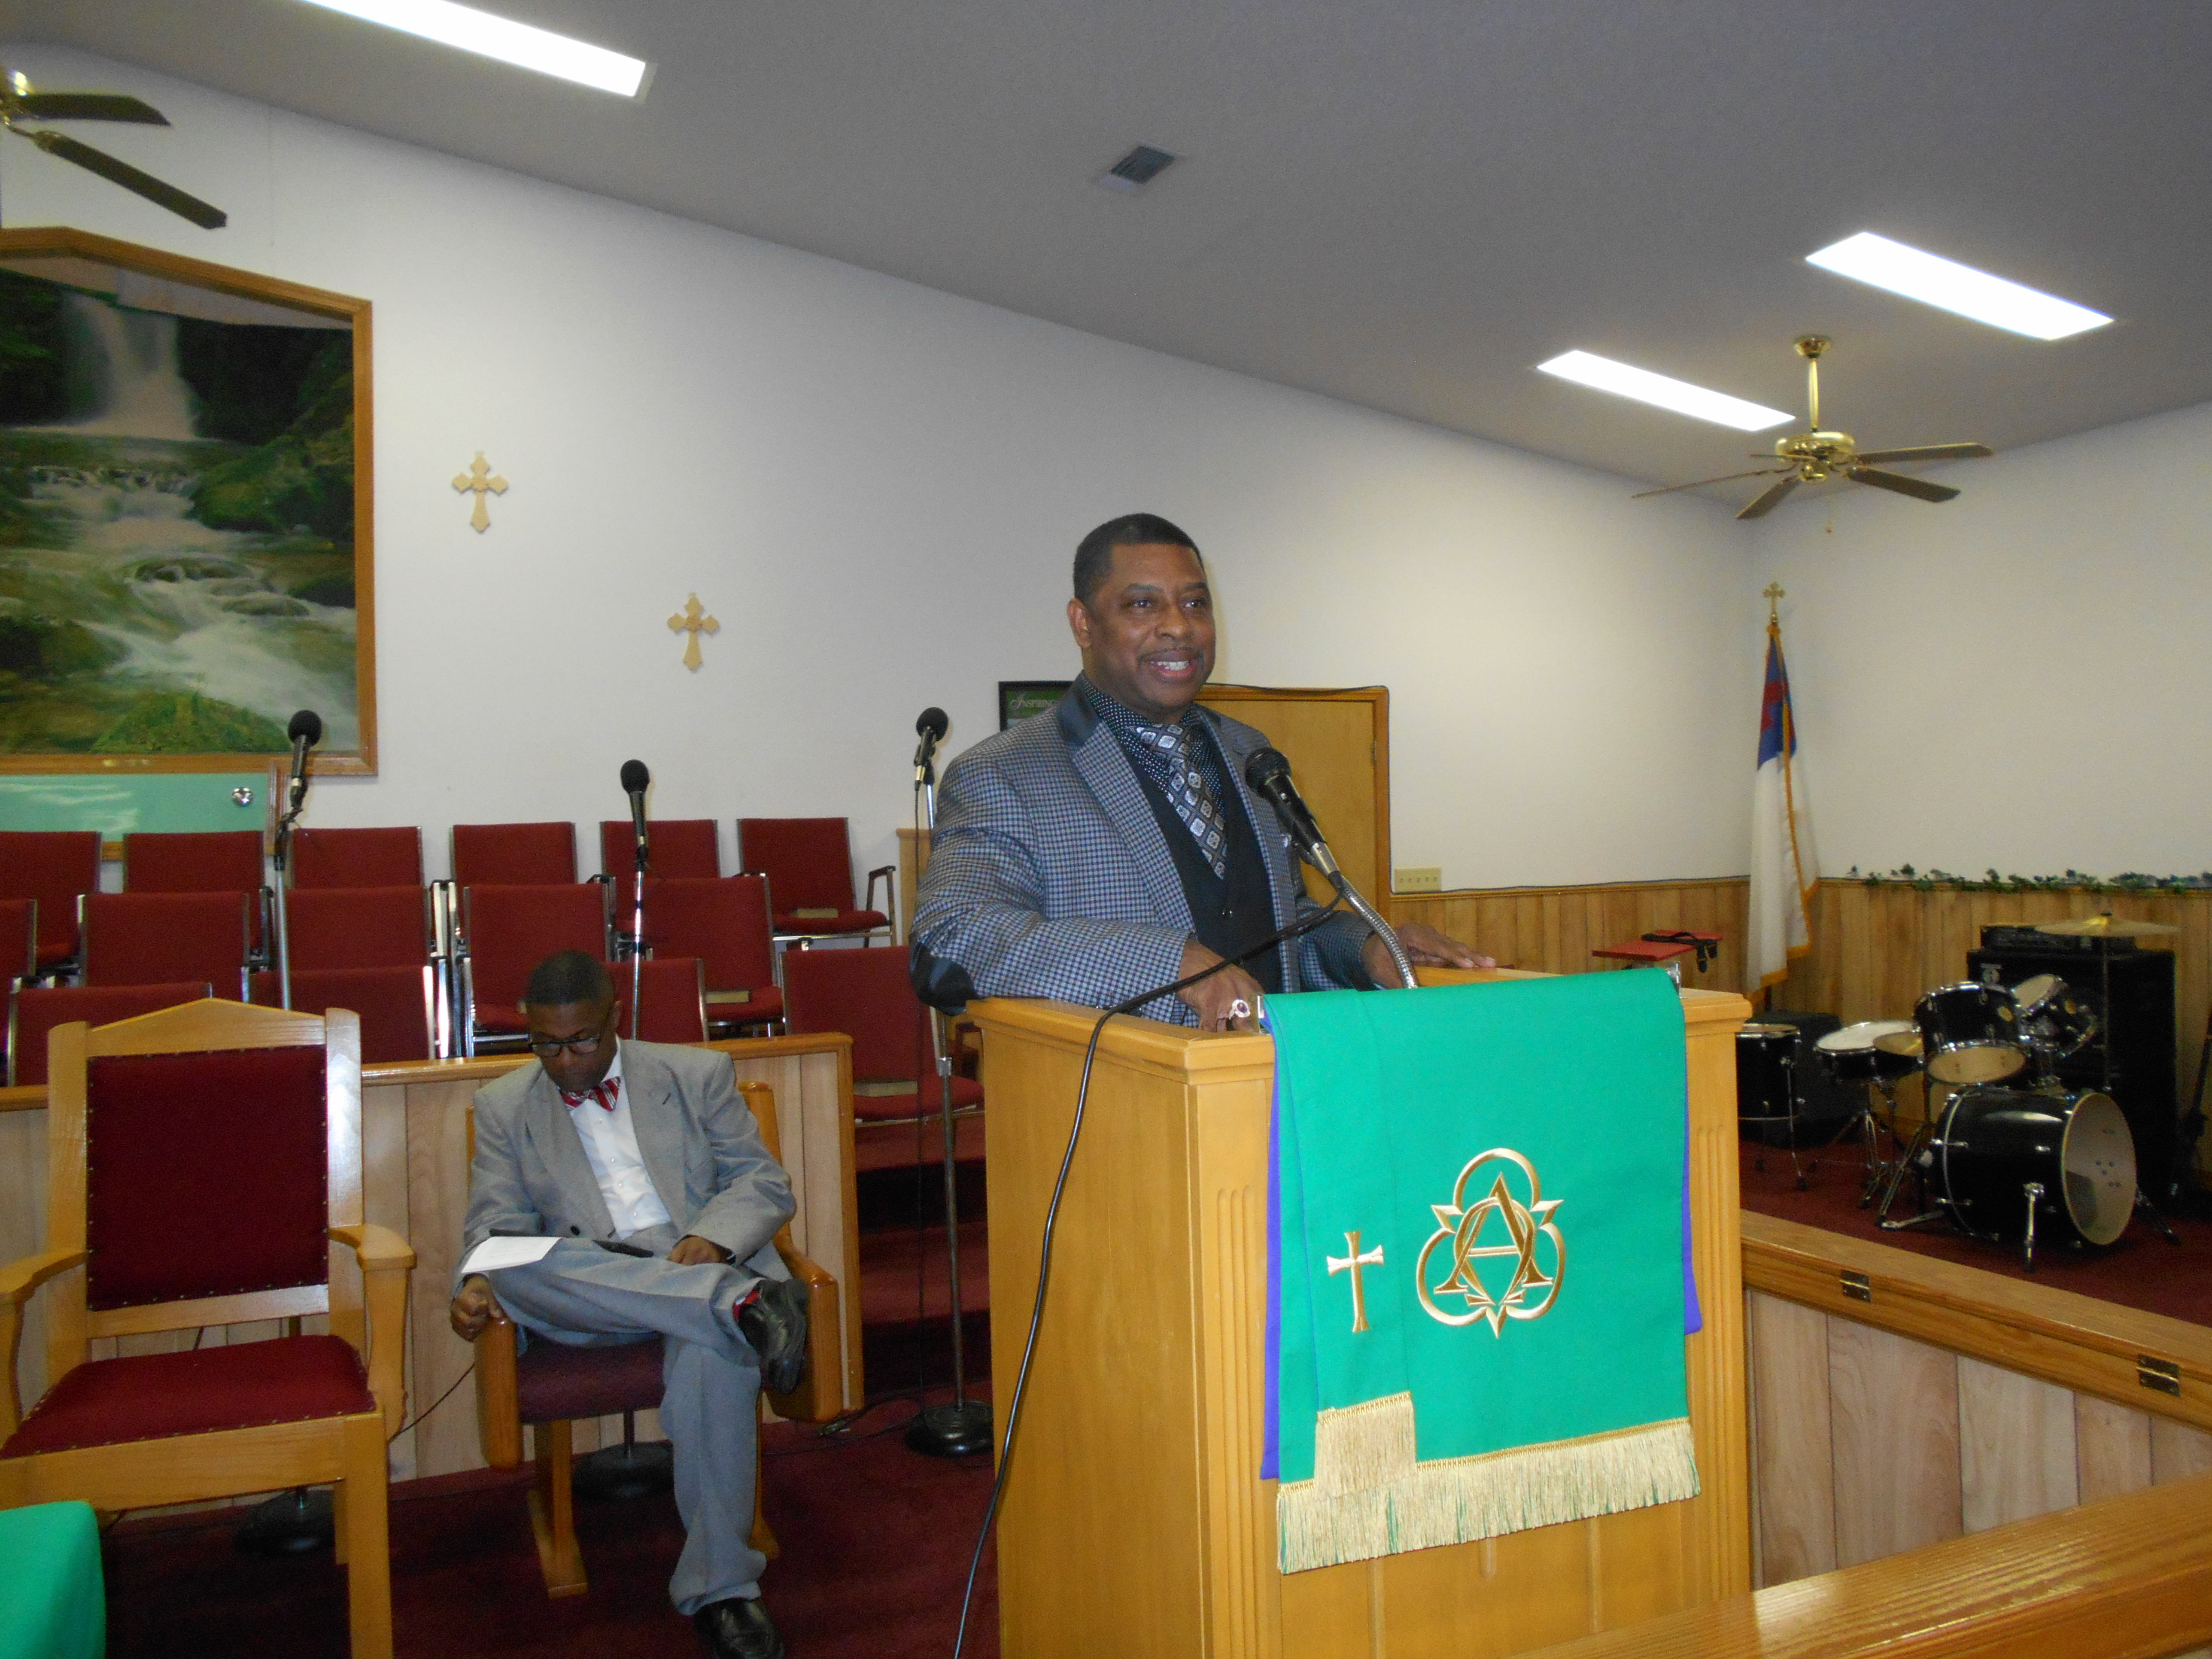 Bishop Charles Archer of the Victory Way Free Church of True Holiness was the keynote speaker her Monday night at the annual MLK Day event.